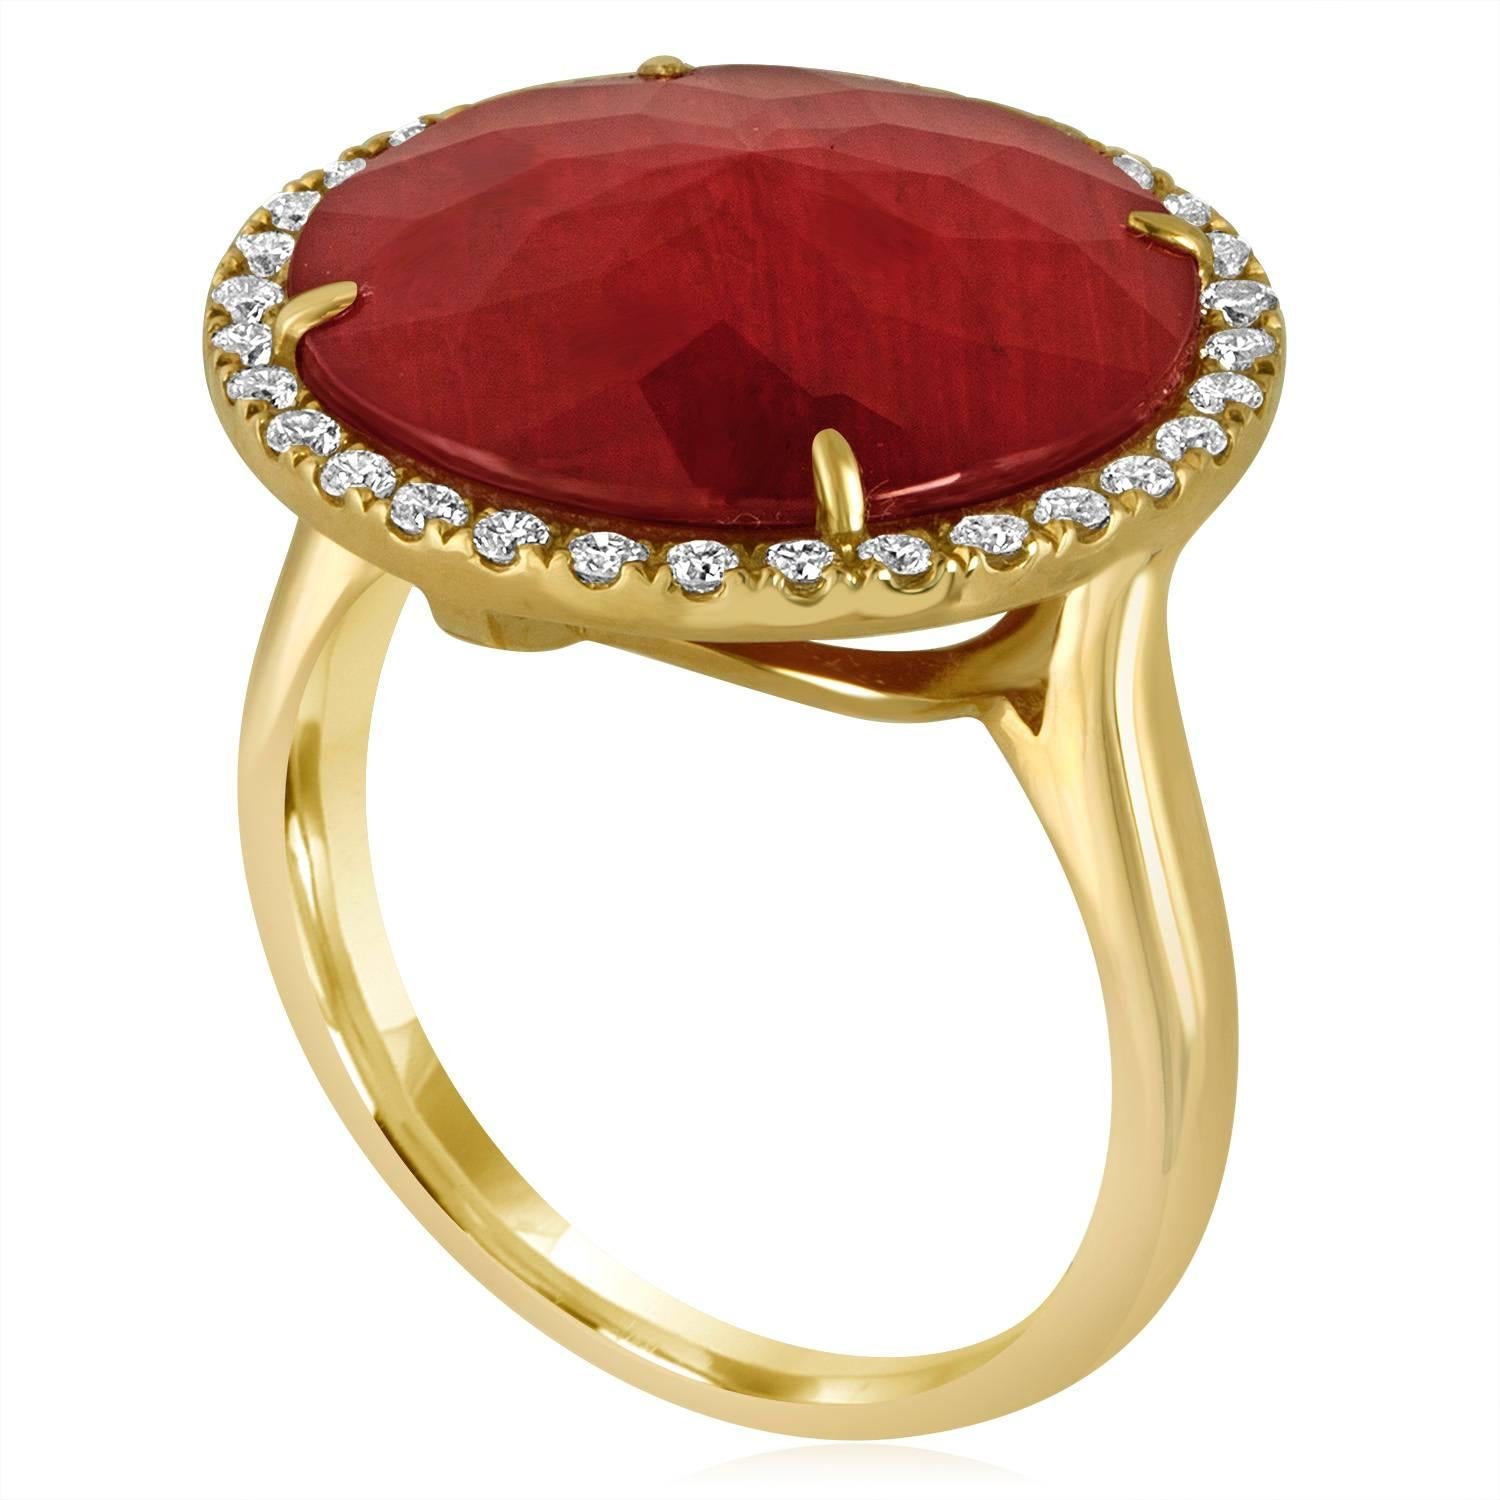 Sliced to display their natural variations in character.
The ruby slices are topped with clear faceted rock crystal.
The slices are set in 14K Yellow Gold and surrounded by Diamonds.
There are 0.39ct in Diamonds G SI.
There are 5.10ct in Ruby and